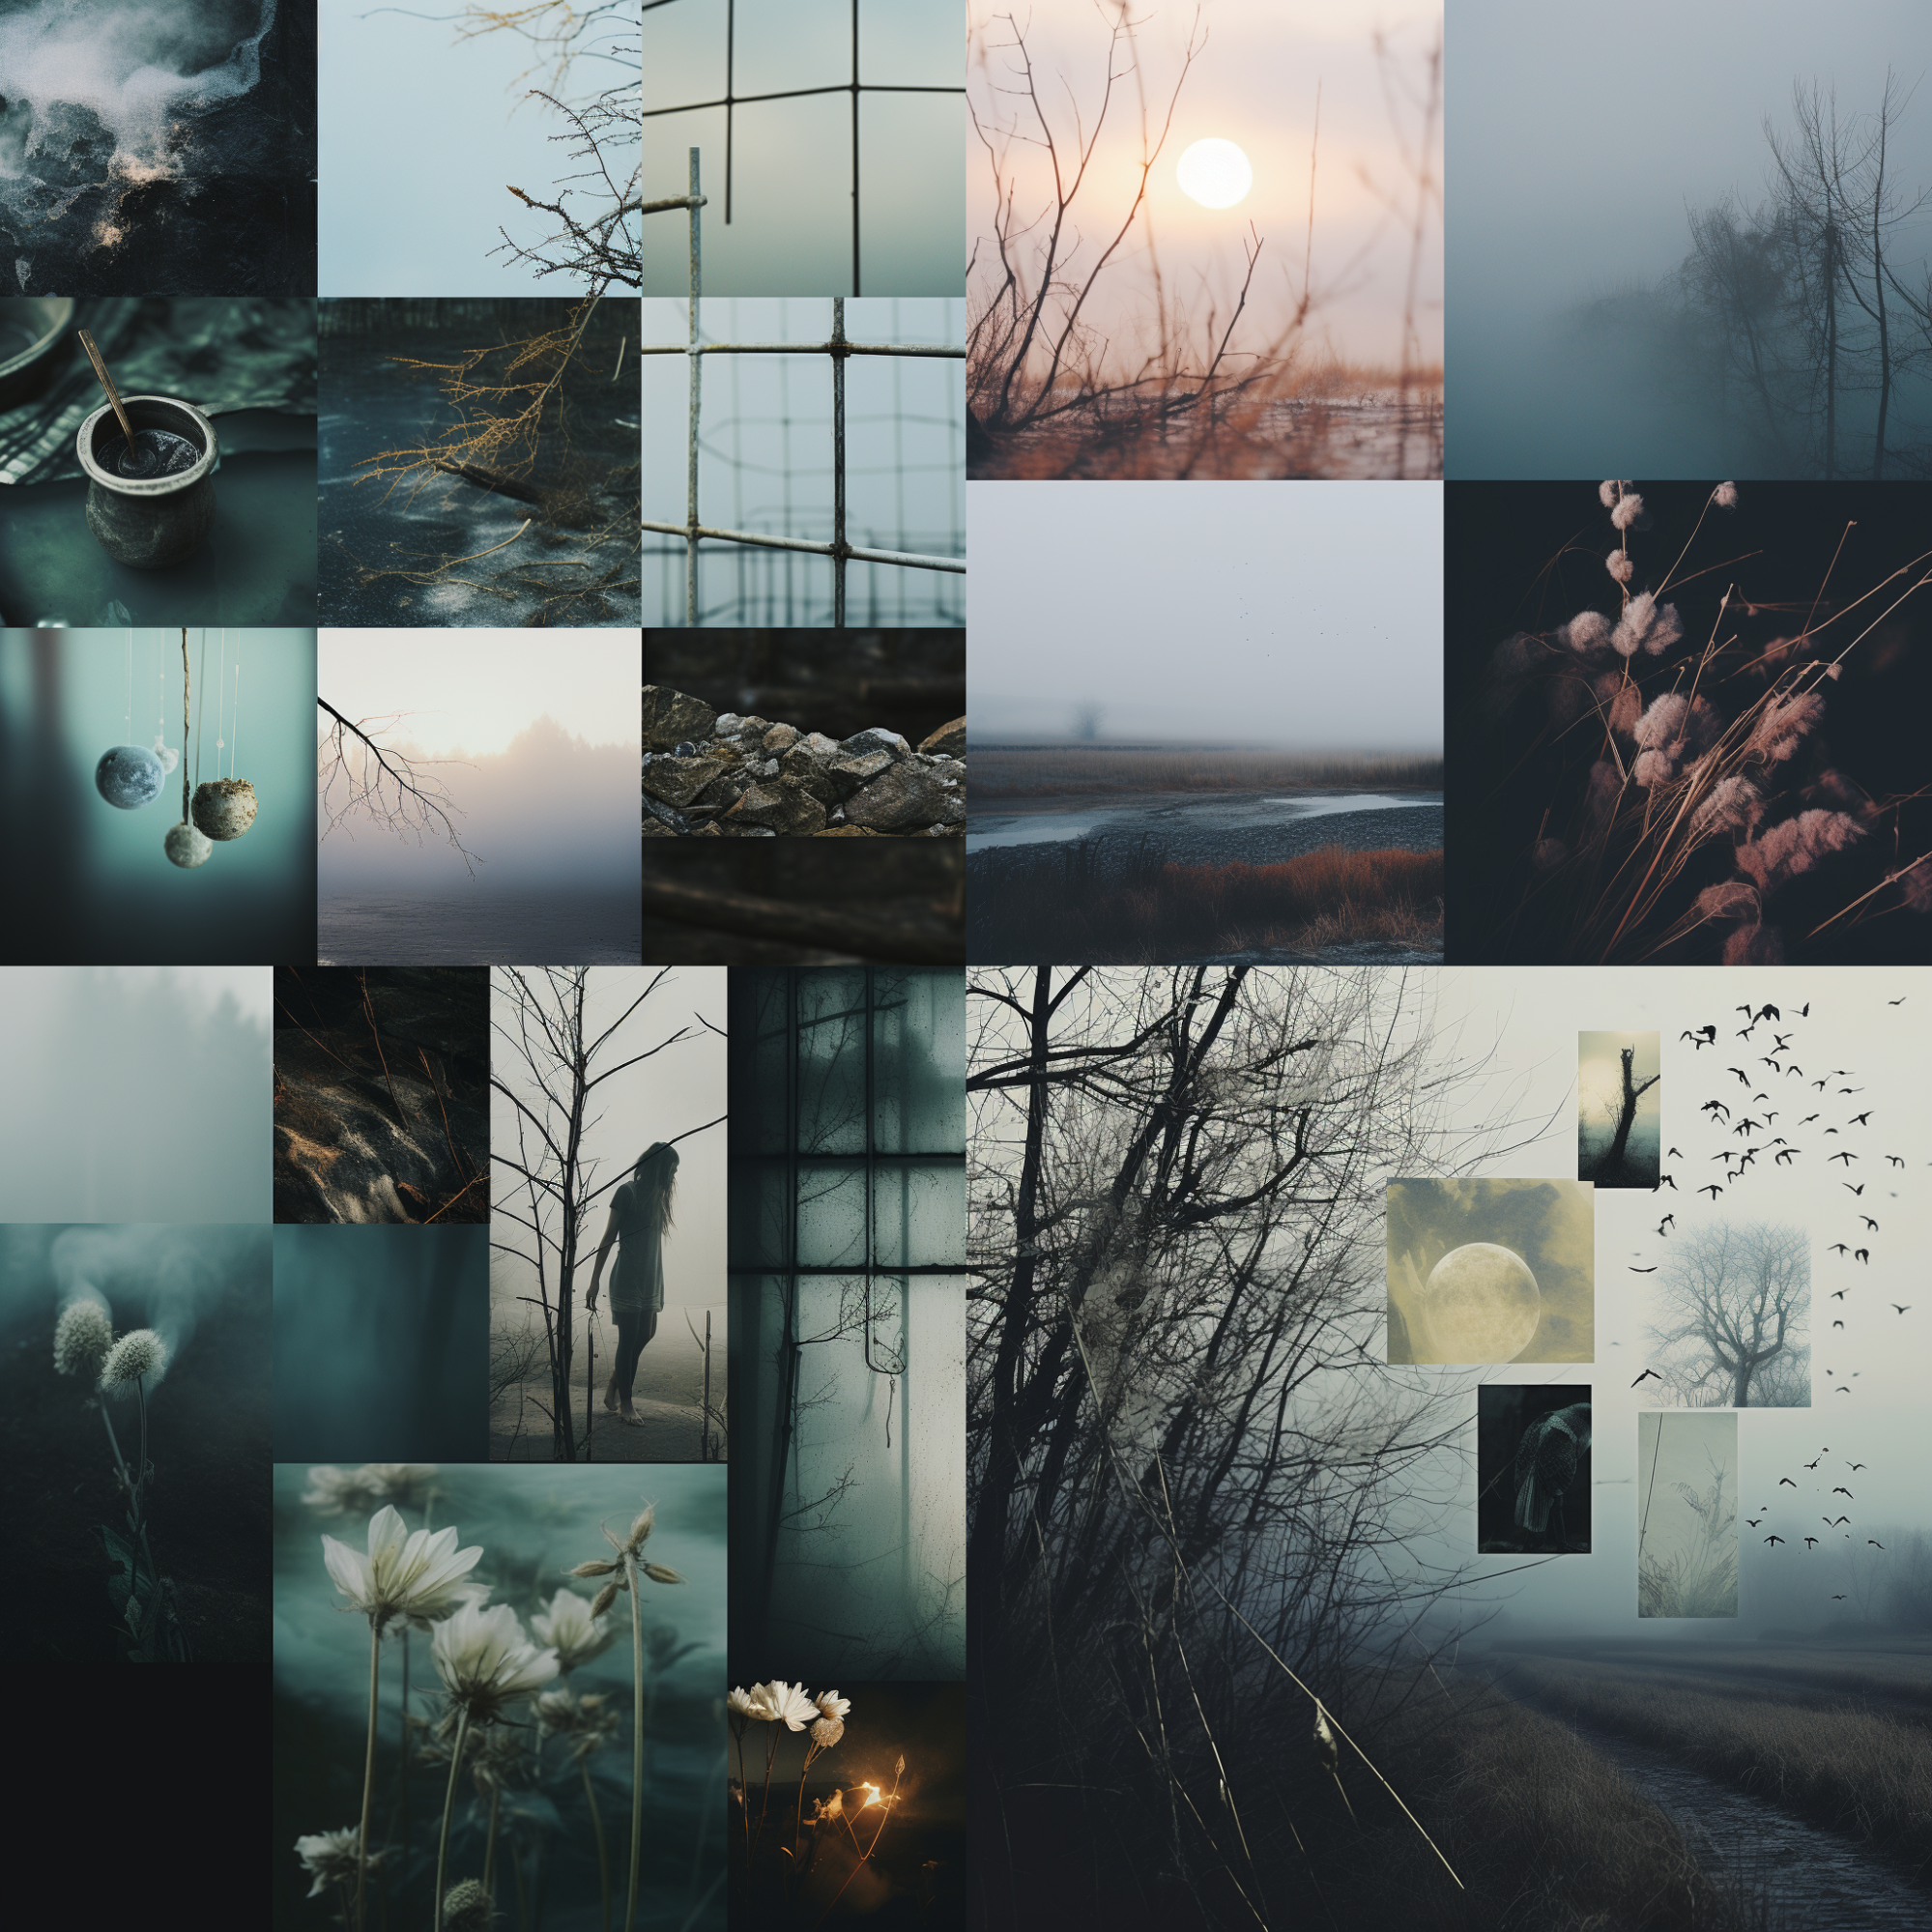 Four image options generated by Midjourney based on a moodboard magic prompt